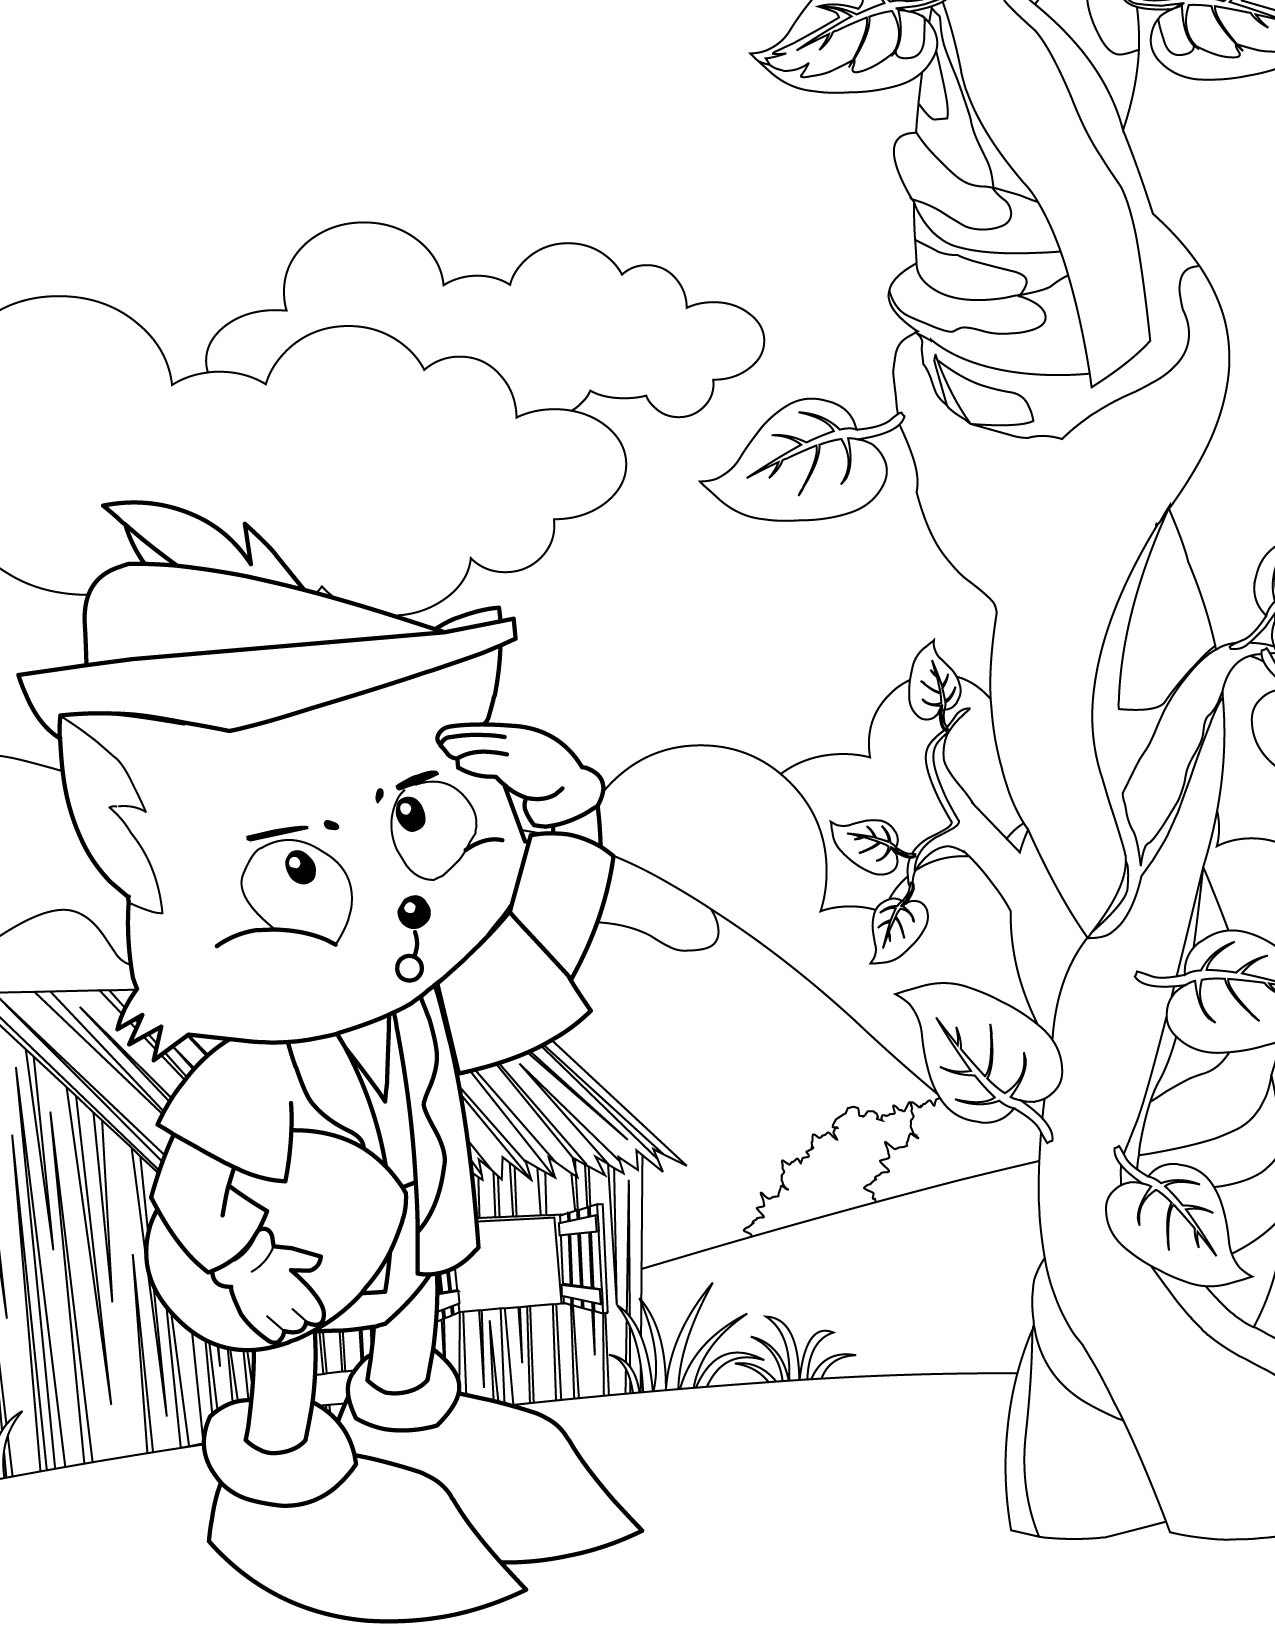 jack and the beanstalk coloring pages free - photo #20